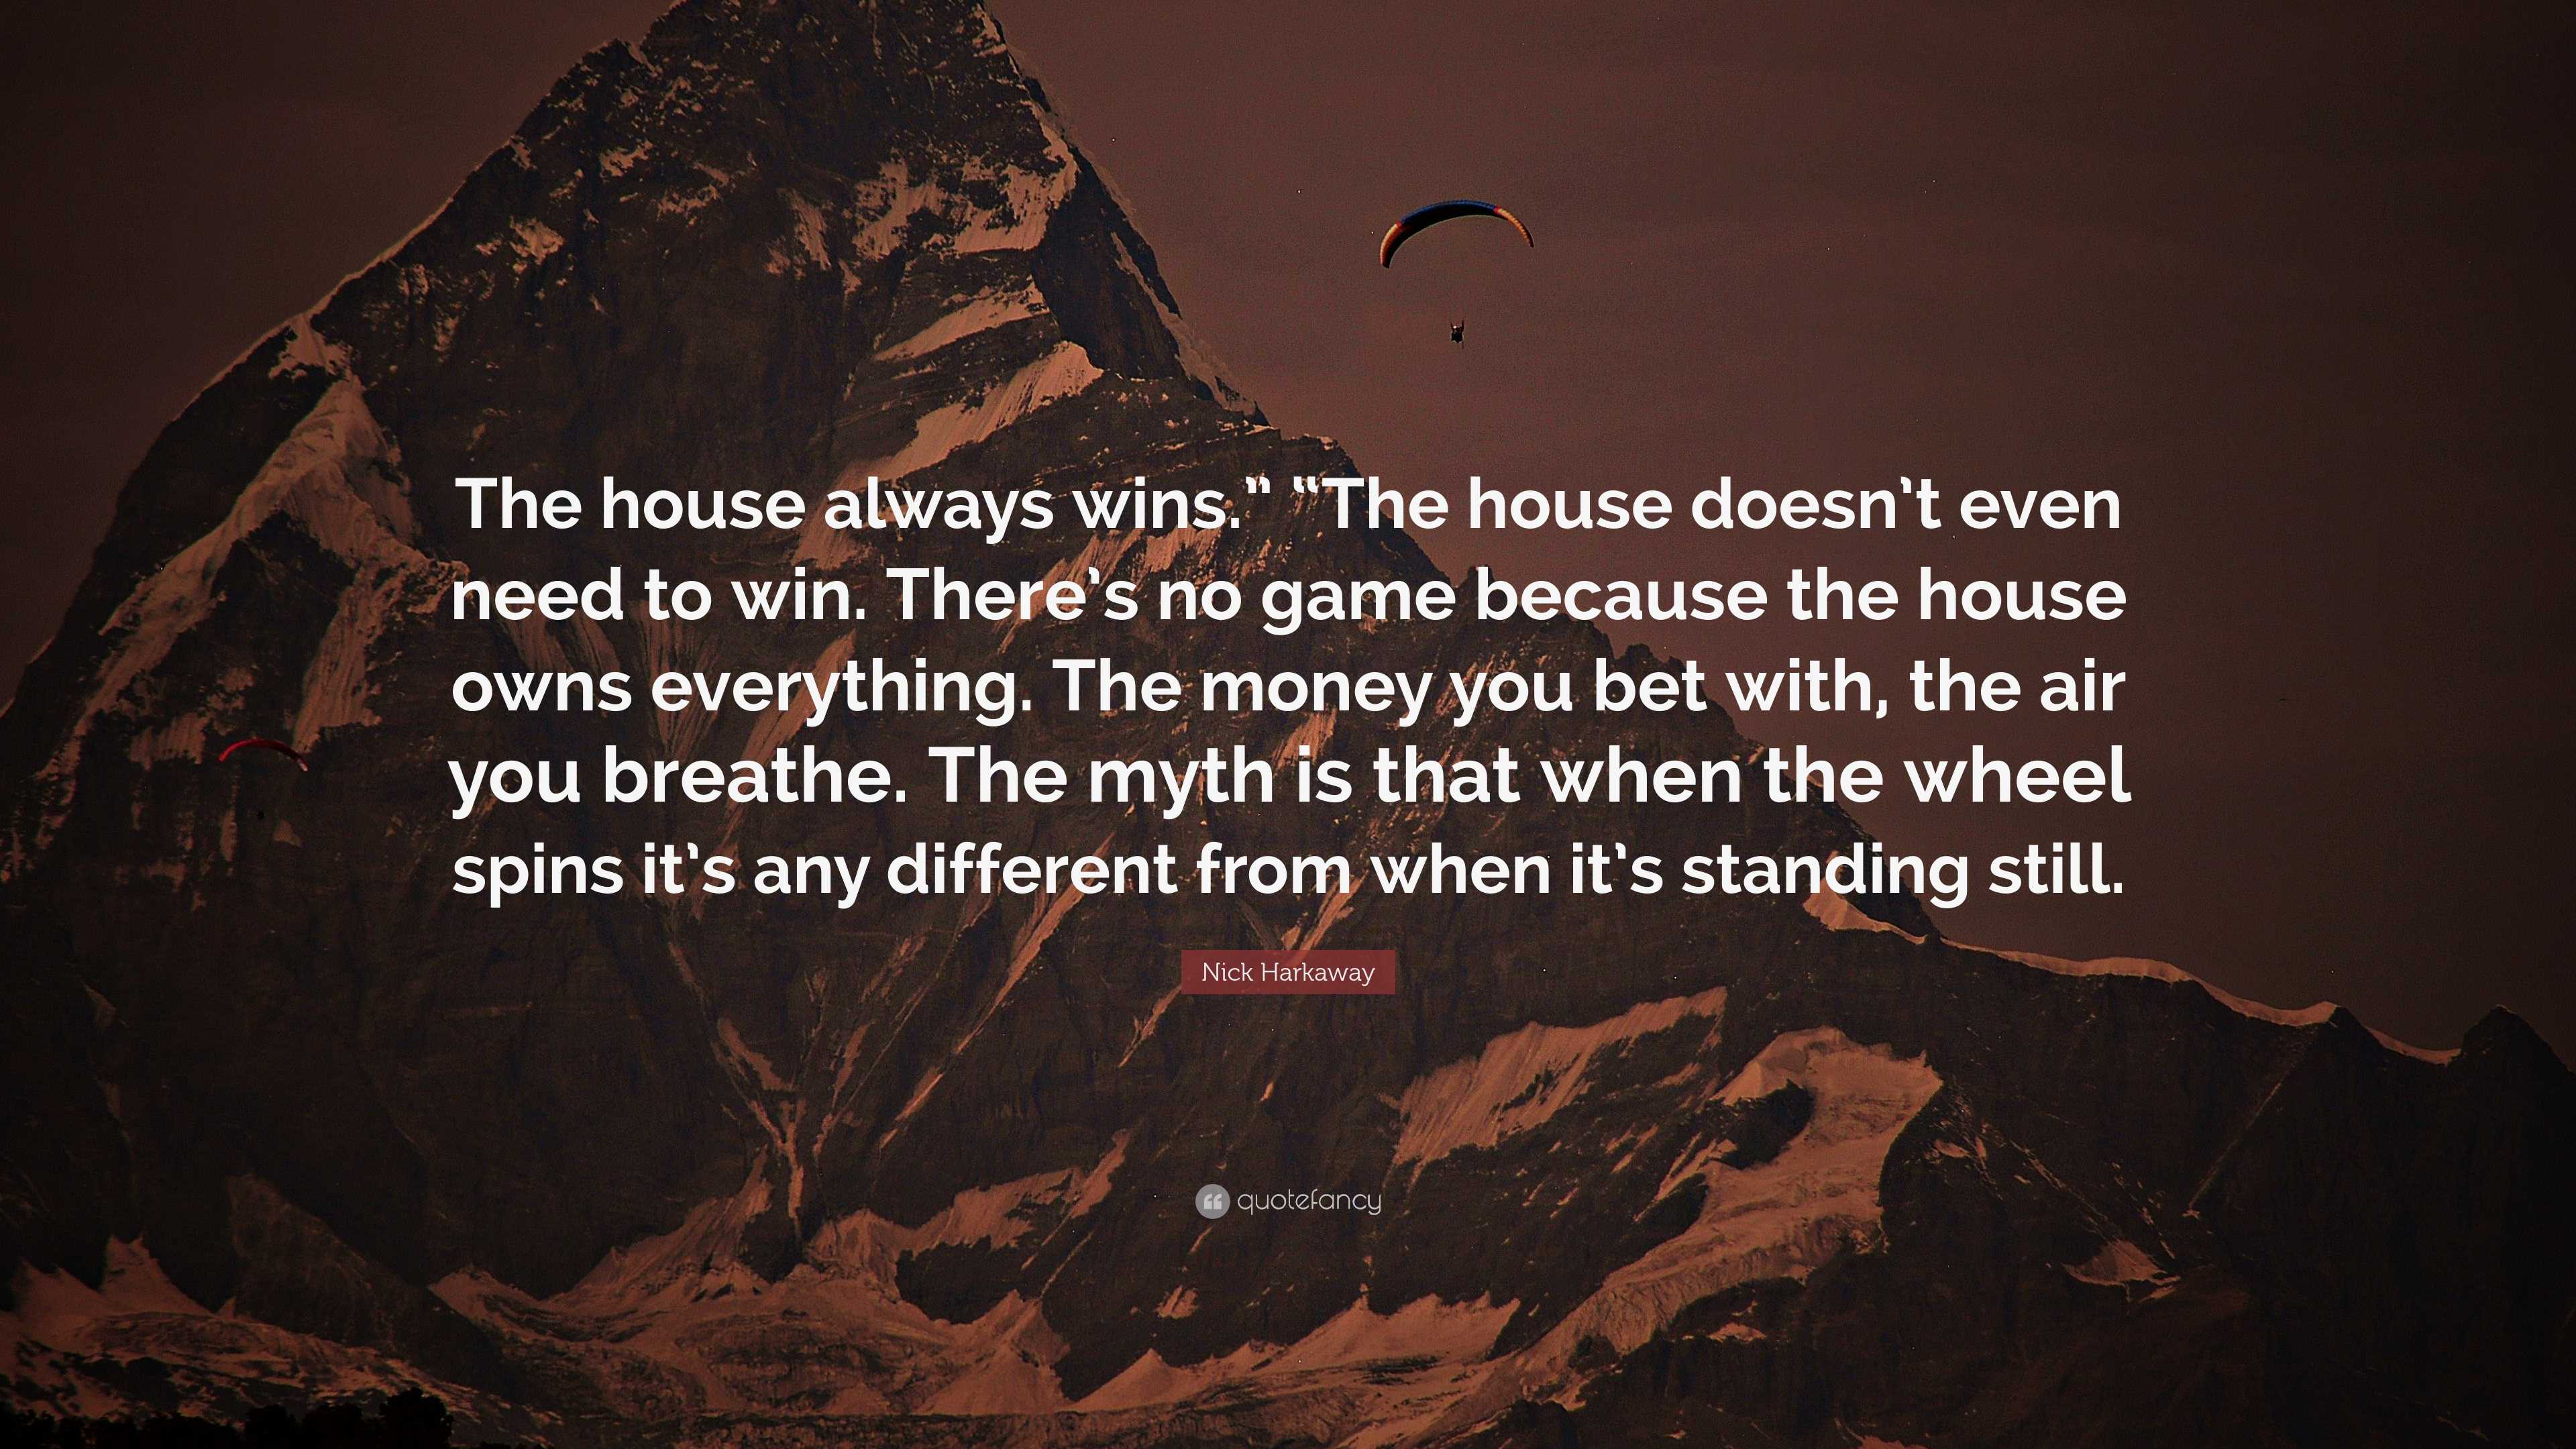 https://quotefancy.com/media/wallpaper/3840x2160/8119541-Nick-Harkaway-Quote-The-house-always-wins-The-house-doesn-t-even-need-to-win-There-s.jpg